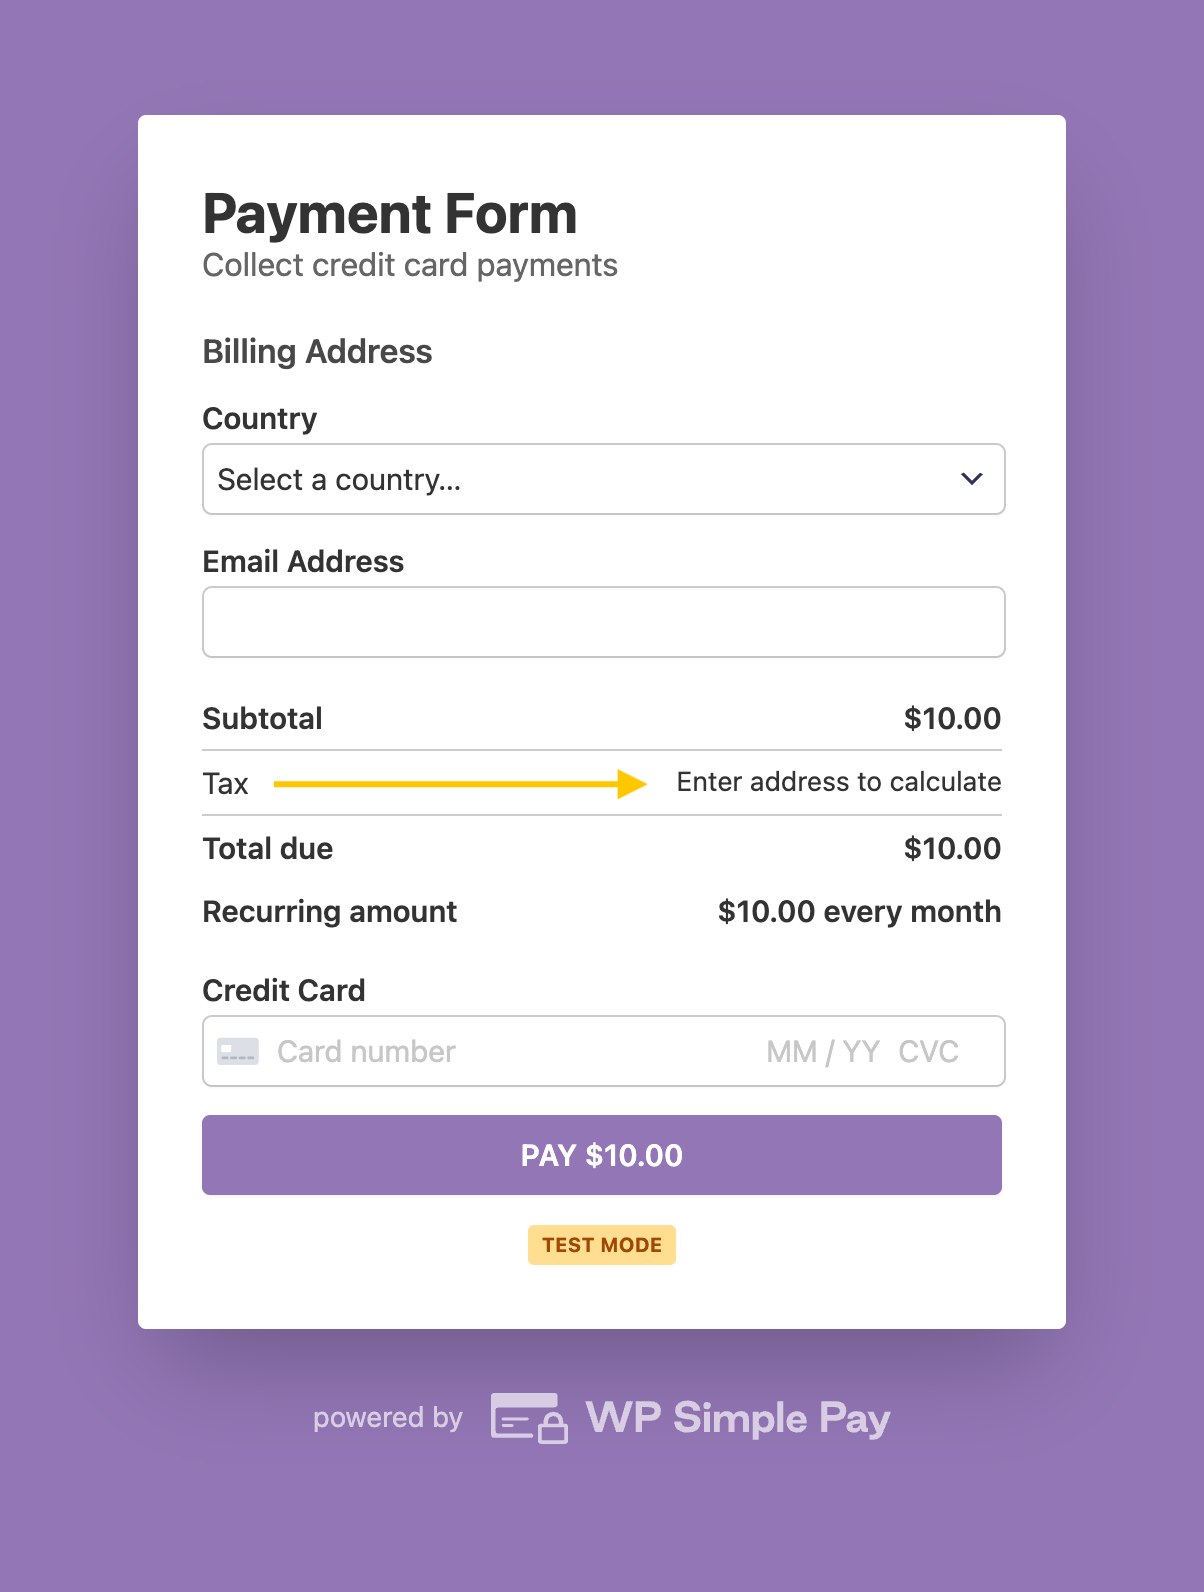 WP Simple Pay automatic tax calculation needs address